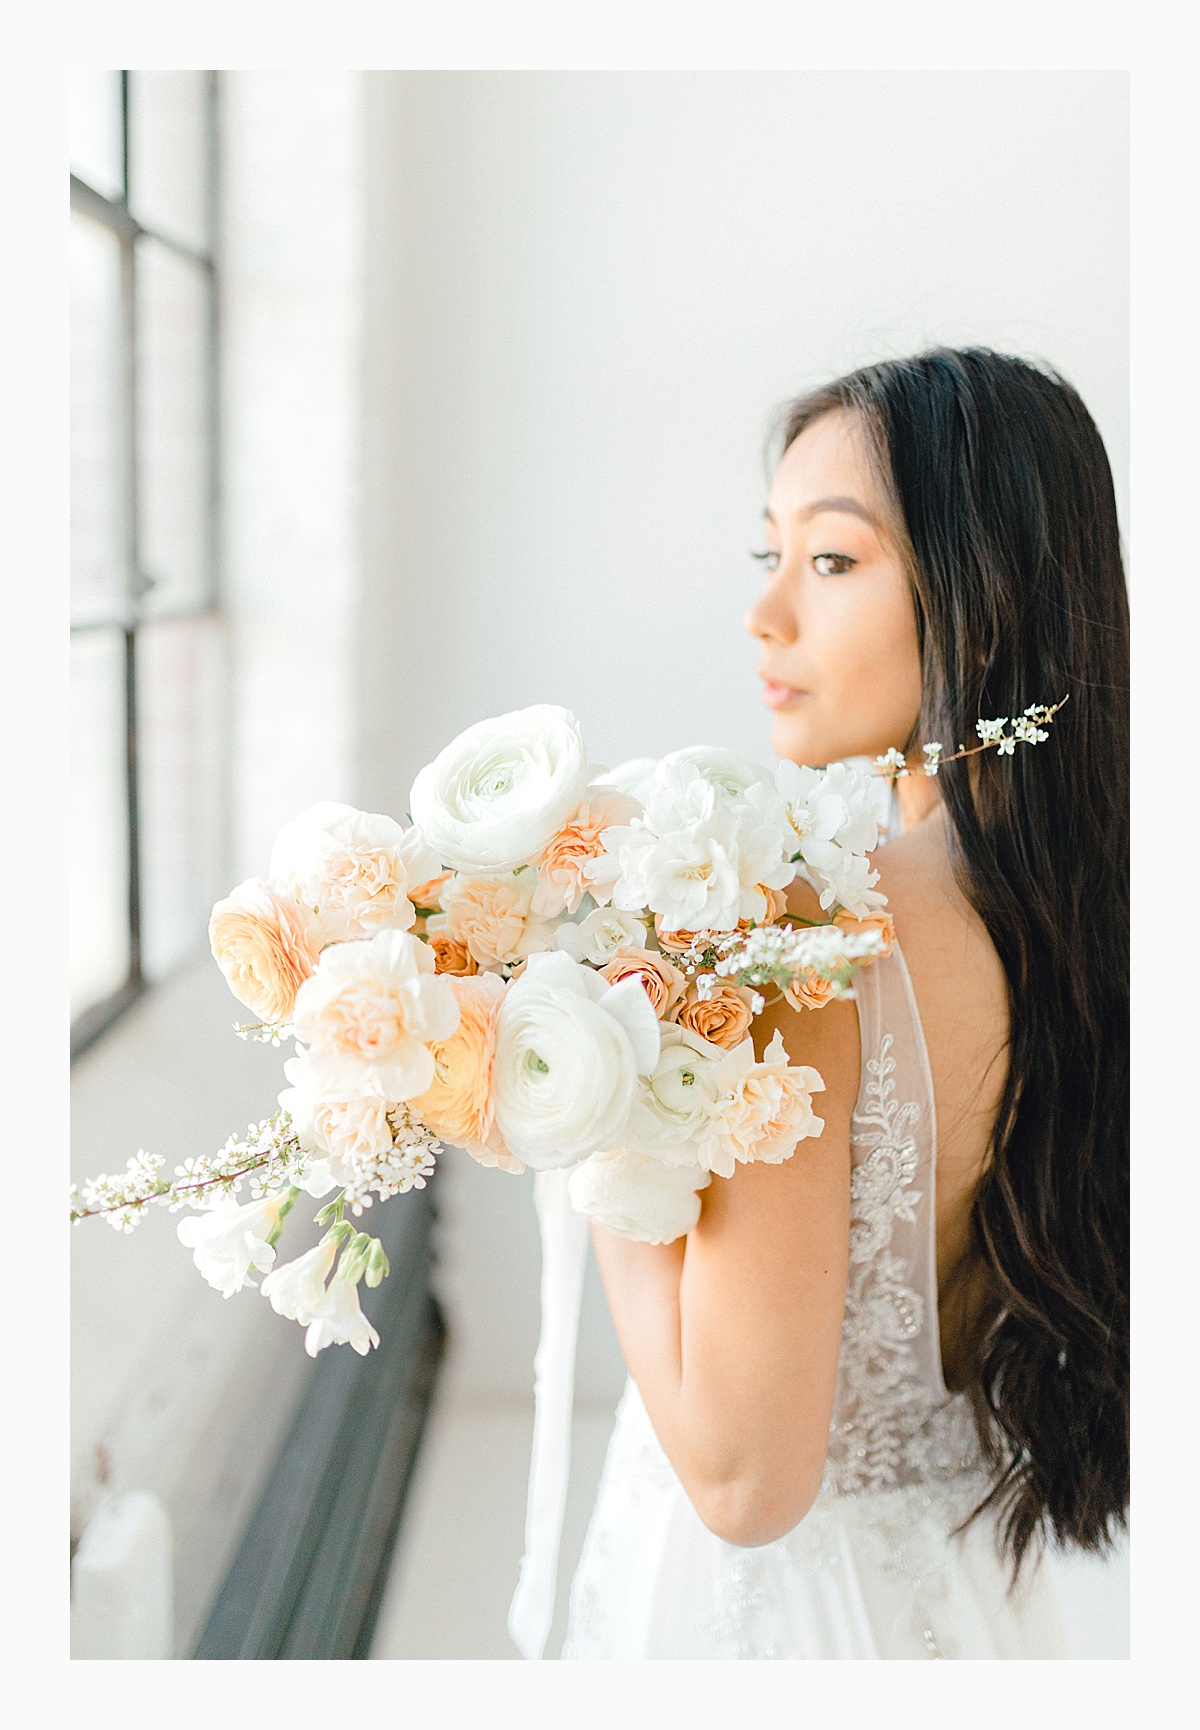 The Bemis Building in downtown Seattle is one of my favorite places to use for photo shoots!  This styled bridal shoot with touches of peach and white was dreamy.  #emmarosecompany #kindredpresets #seattlebride_0026.jpg